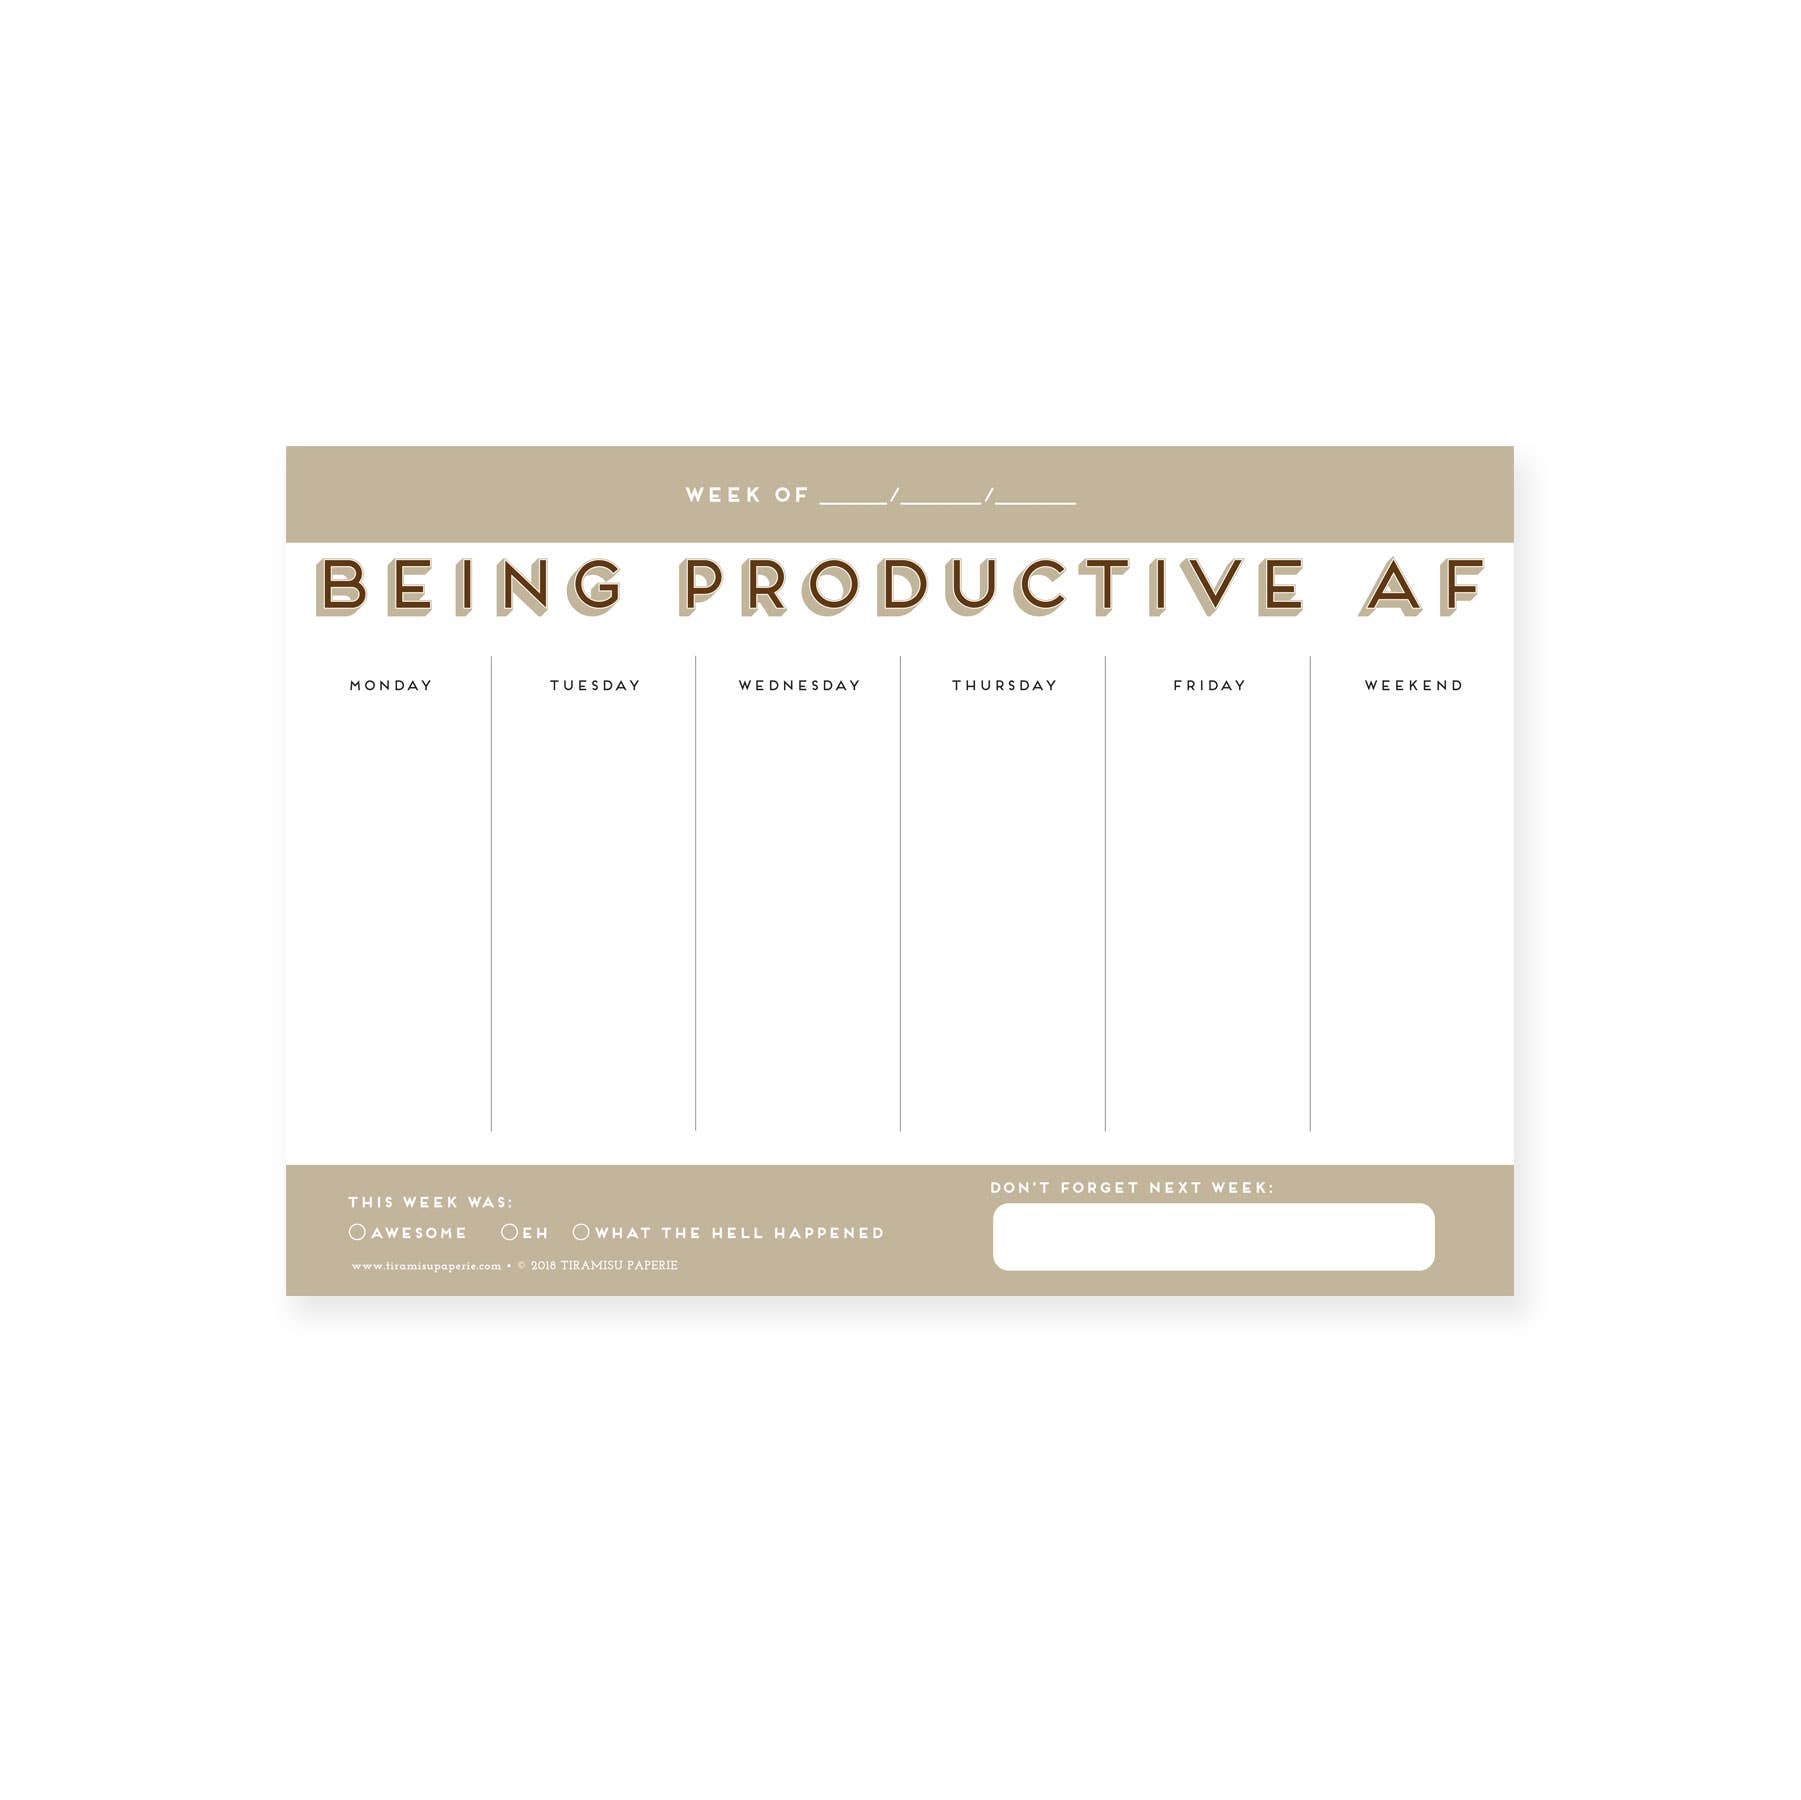 Tiramisu Paperie - Being Productive AF Weekly Planner